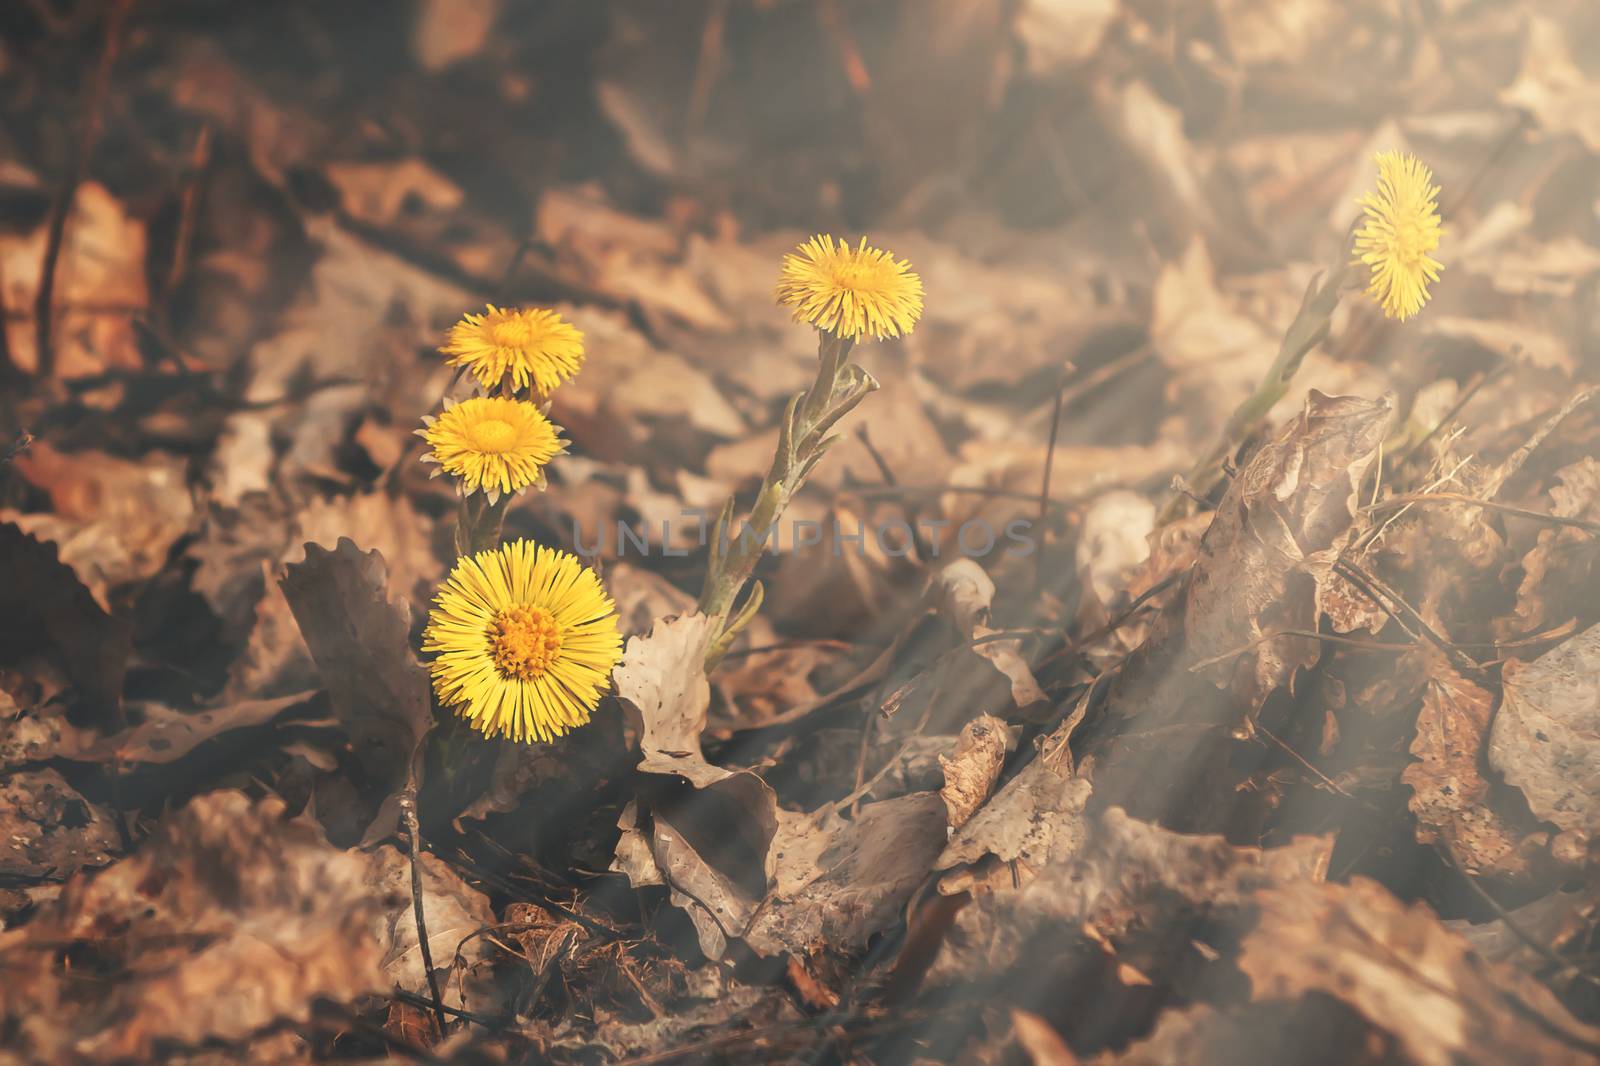 Early spring flowers of coltsfoot made their way through a bed of dry leaves by galsand